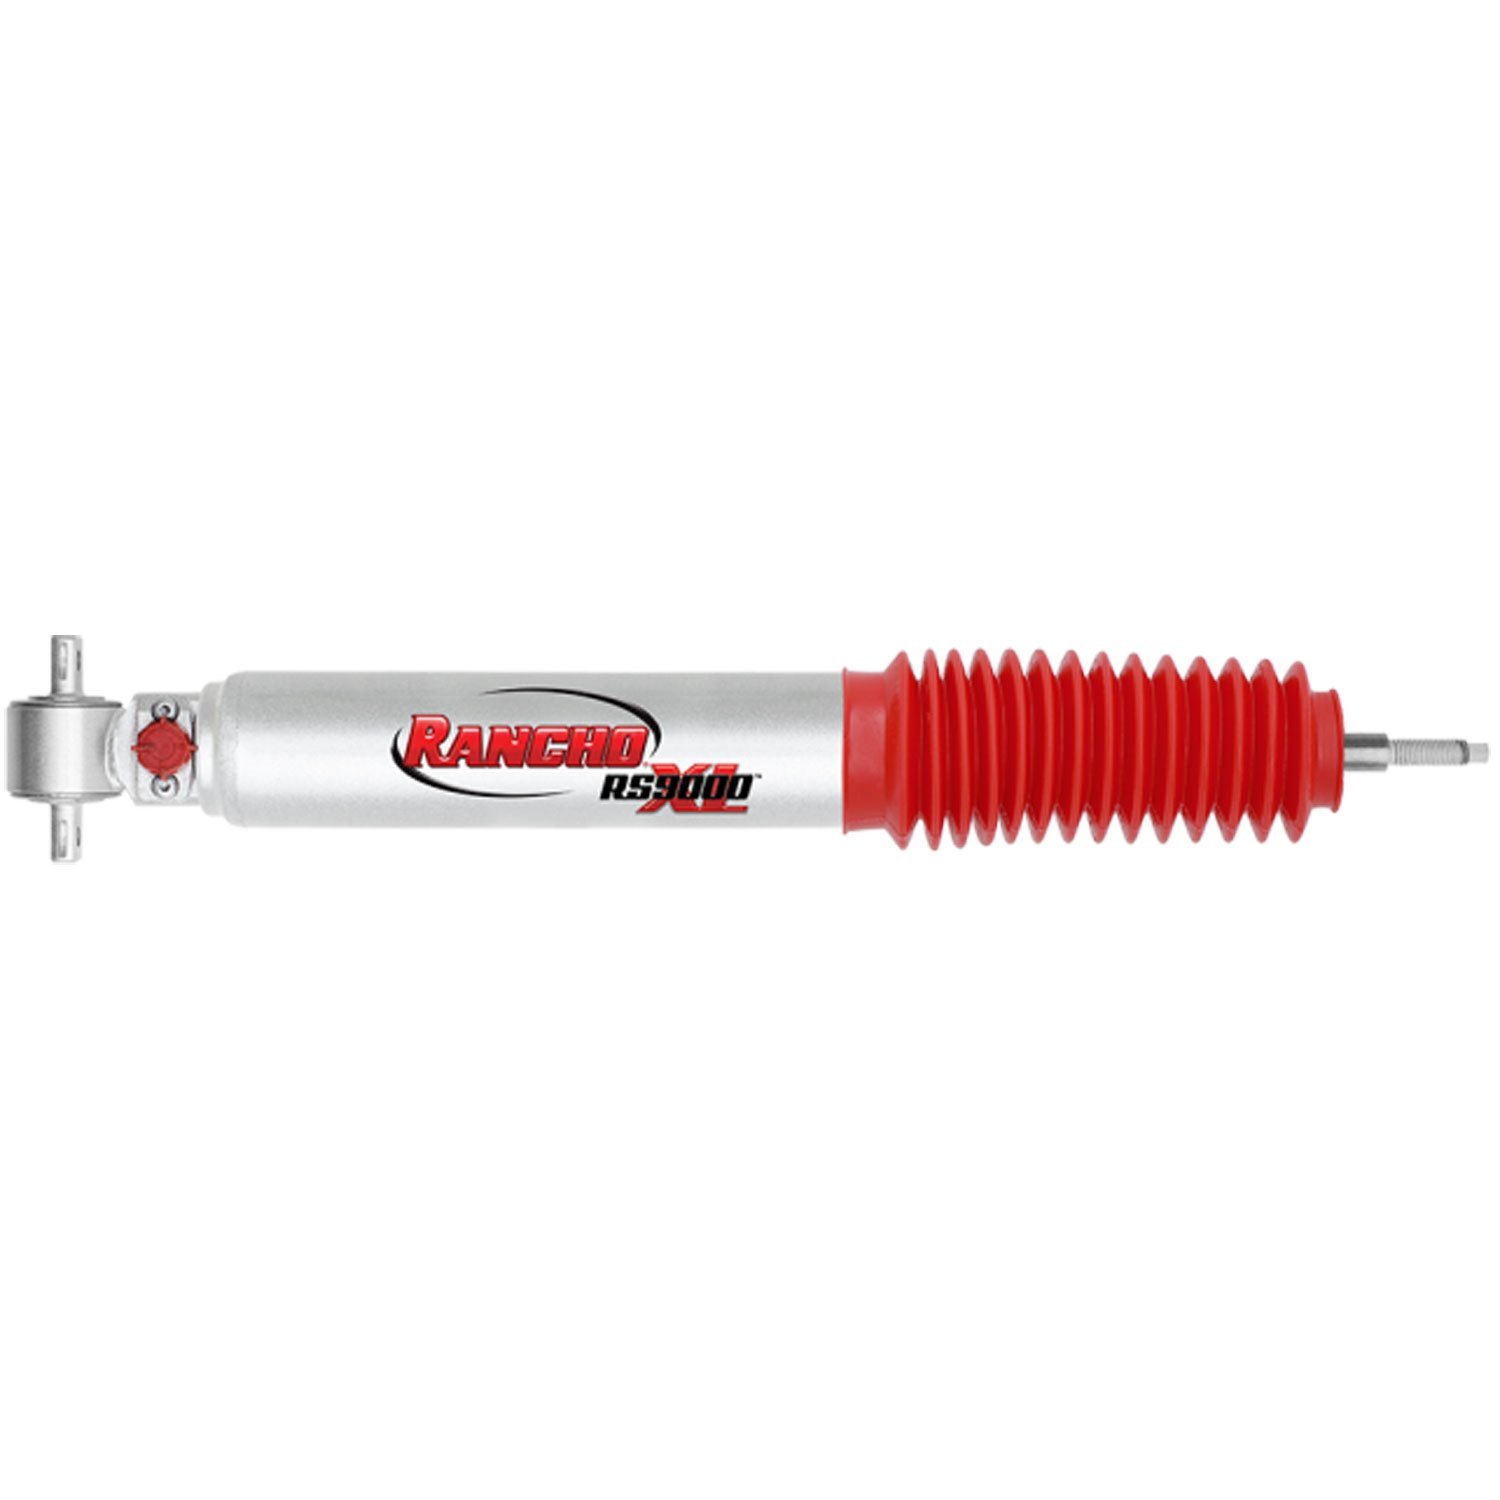 RS9000XL Front Shock Absorber Fits GM 1500/2500 Pickups and Fullsize SUVs